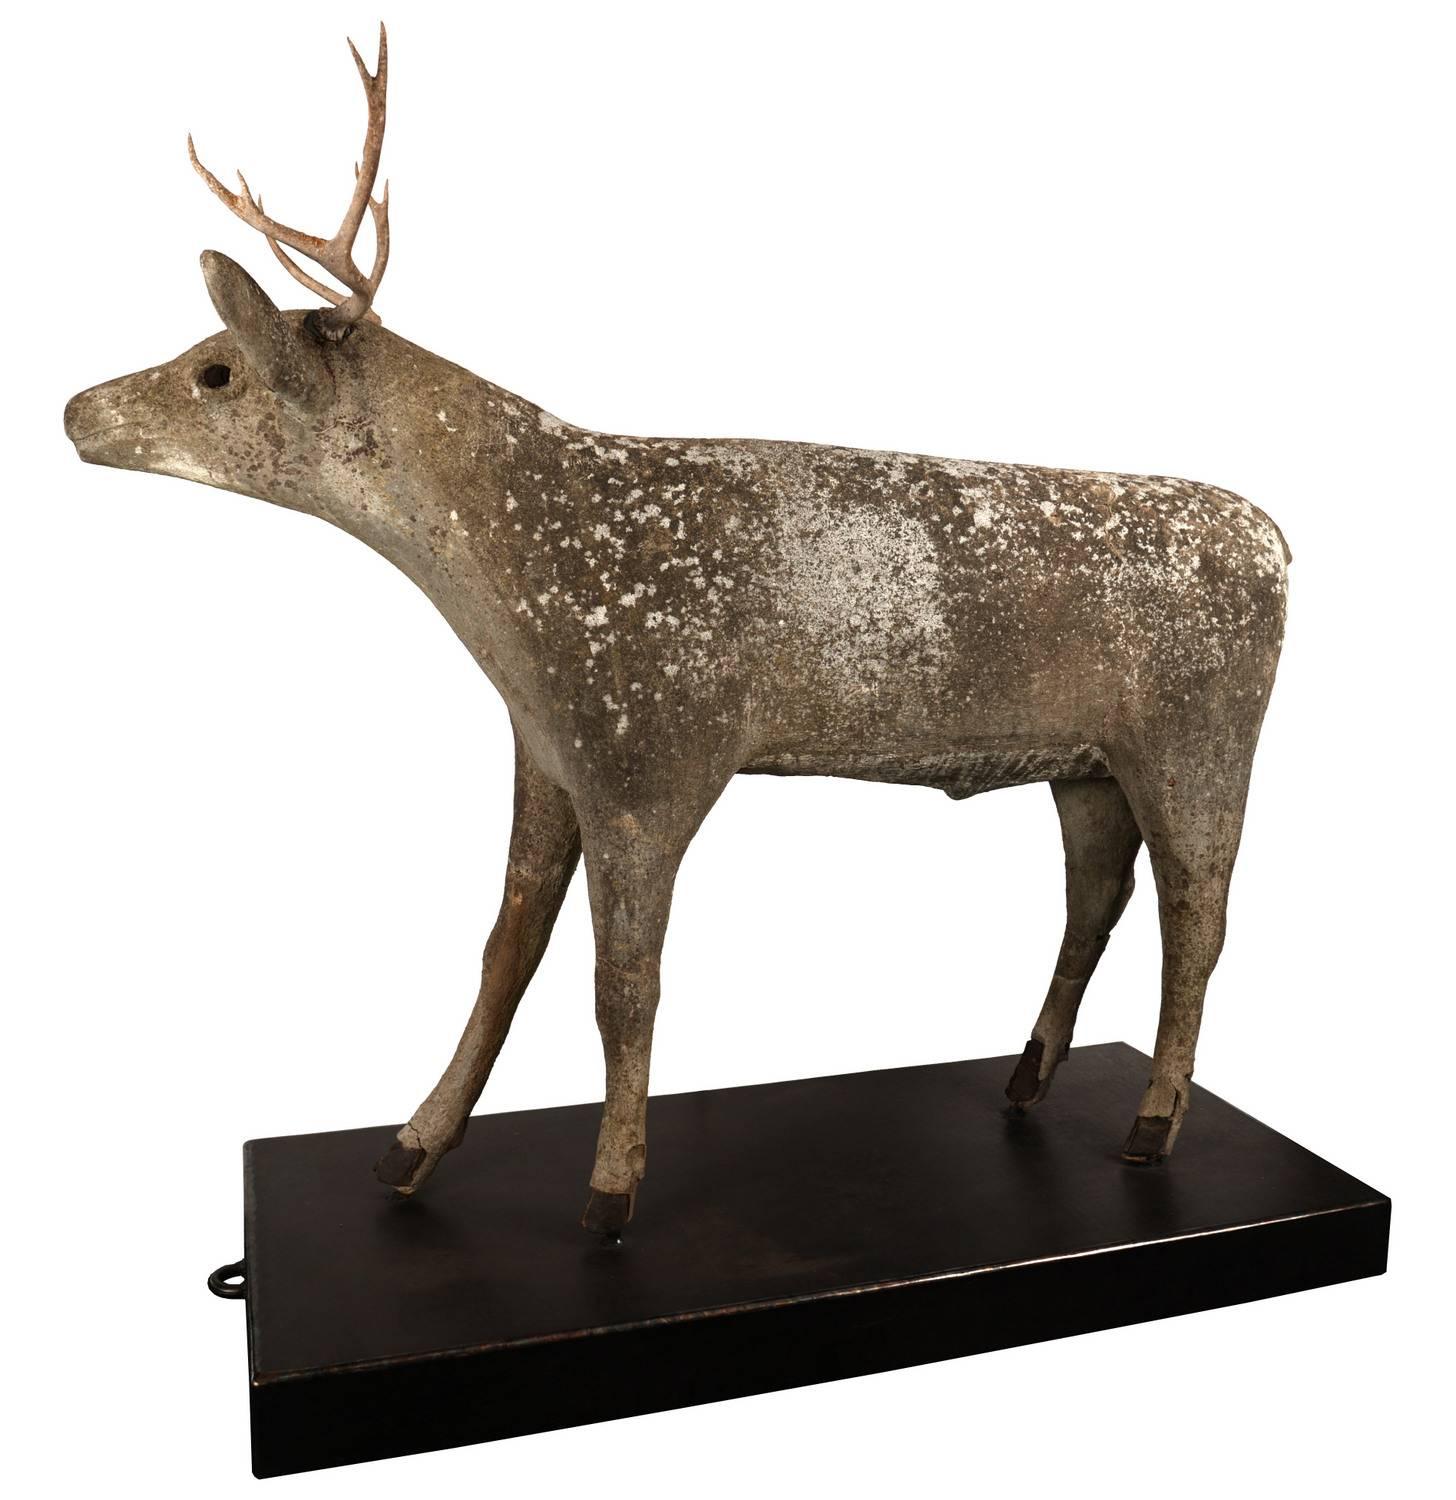 This naive Folk Art beauty is larger than lifesize and has been hand-formed out of concrete and steel. Organic elements include a real deer skull and hooves. The steel armature has been welded to a custom-made steel plate on rubberized casters